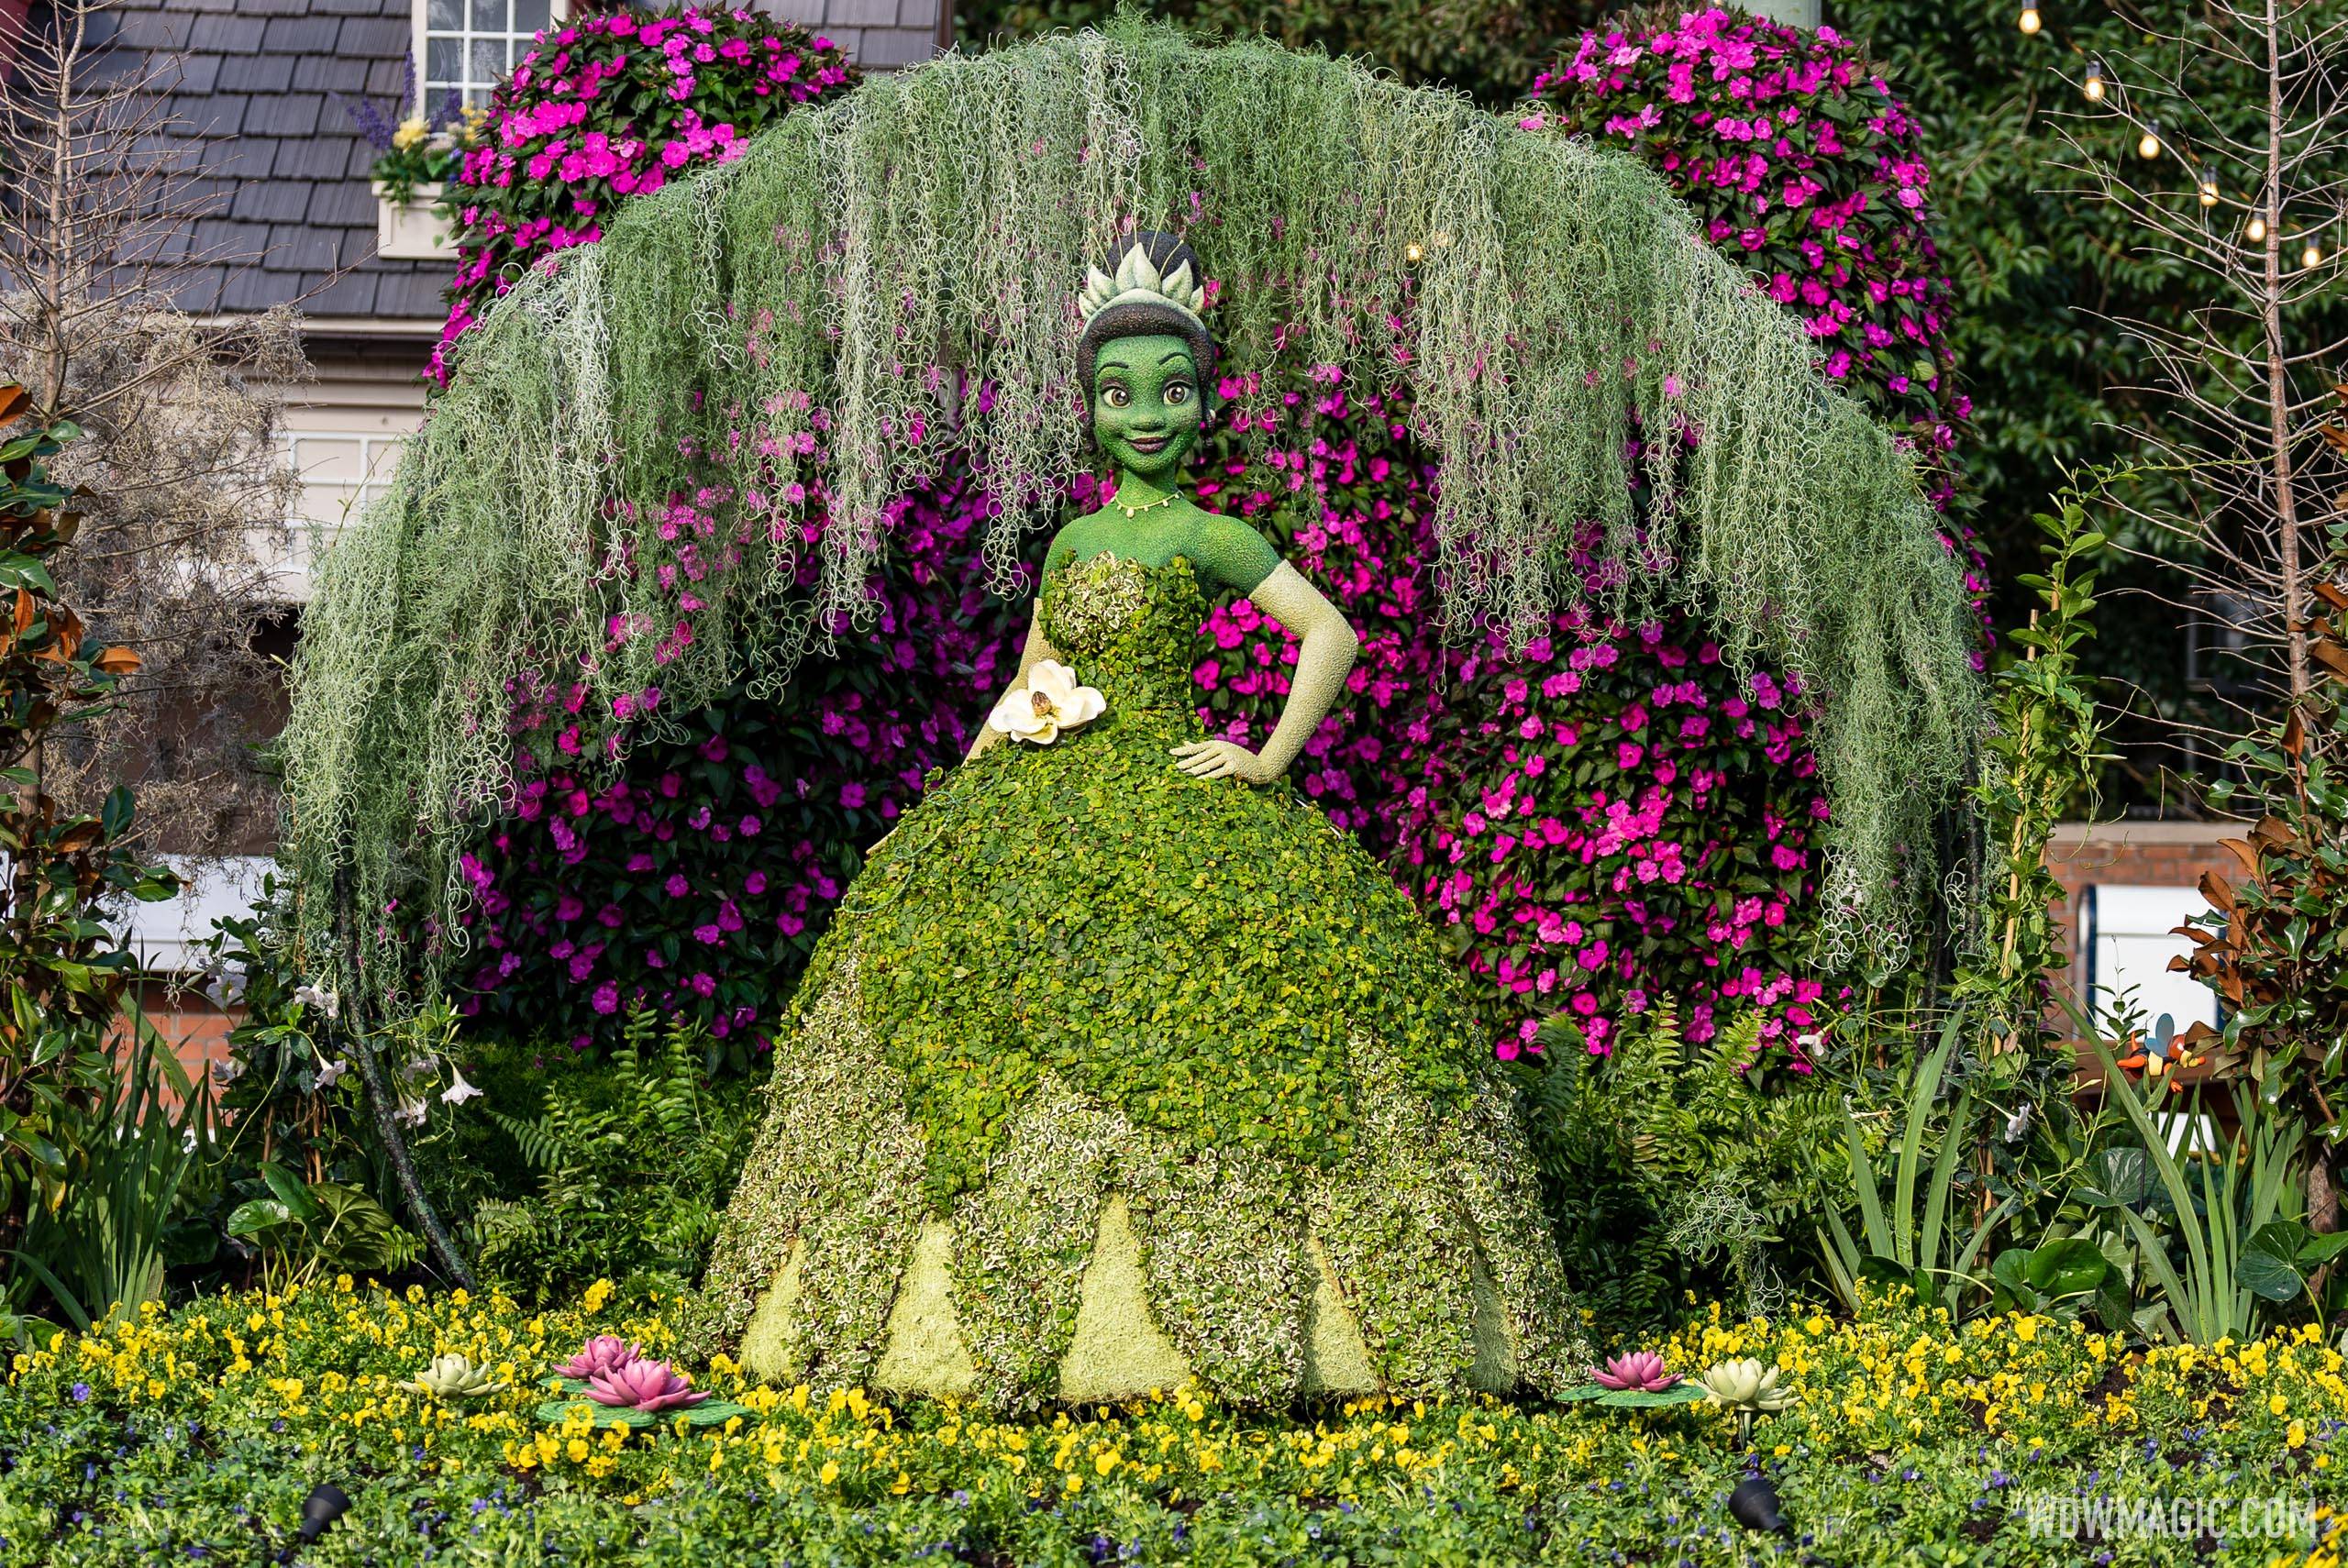 All-new Princess Tiana topiary debuts at The American Adventure in EPCOT